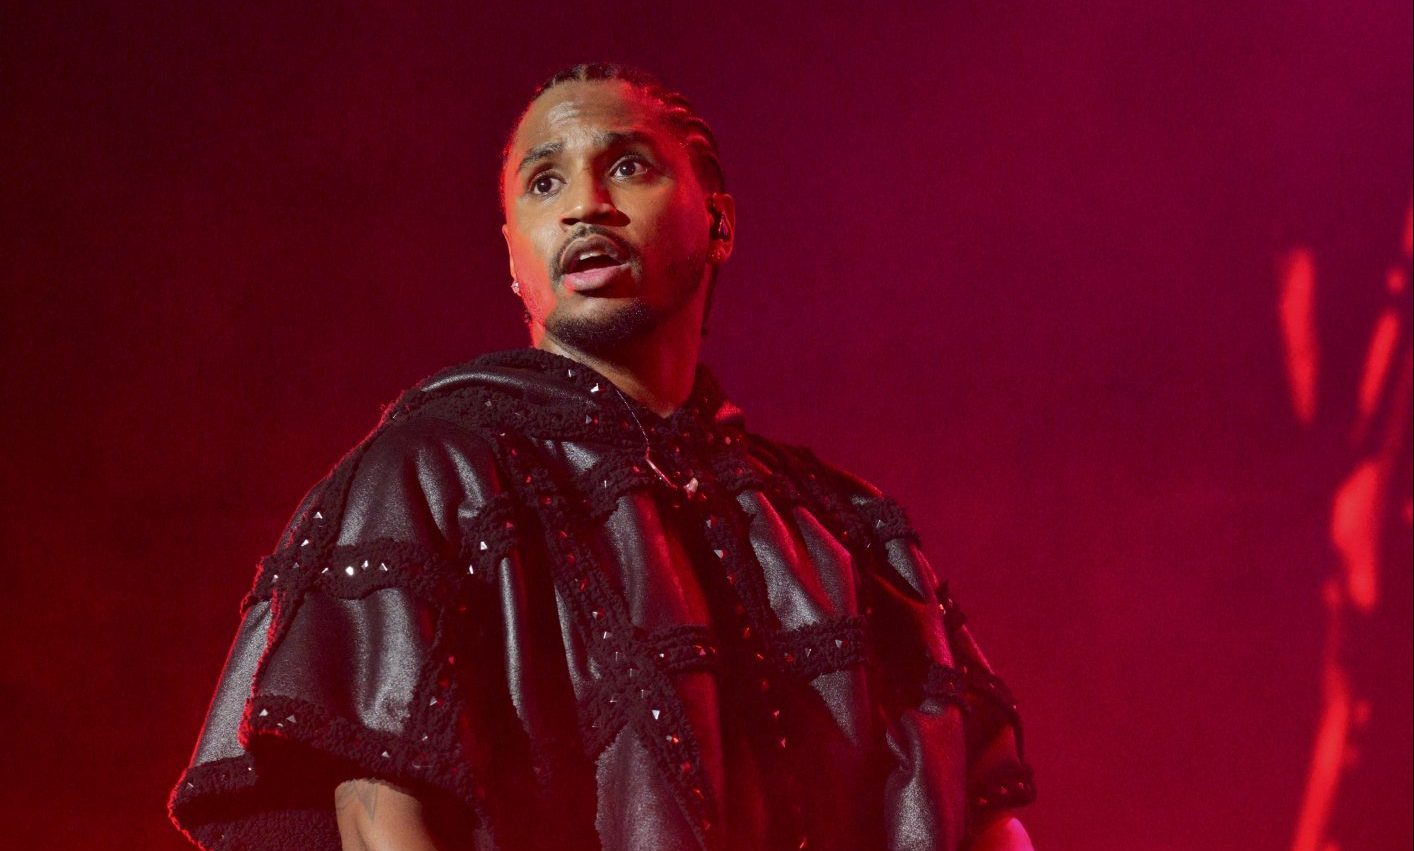 Trey Songz Takes Provocative Pics With Fans At Meet & Greet